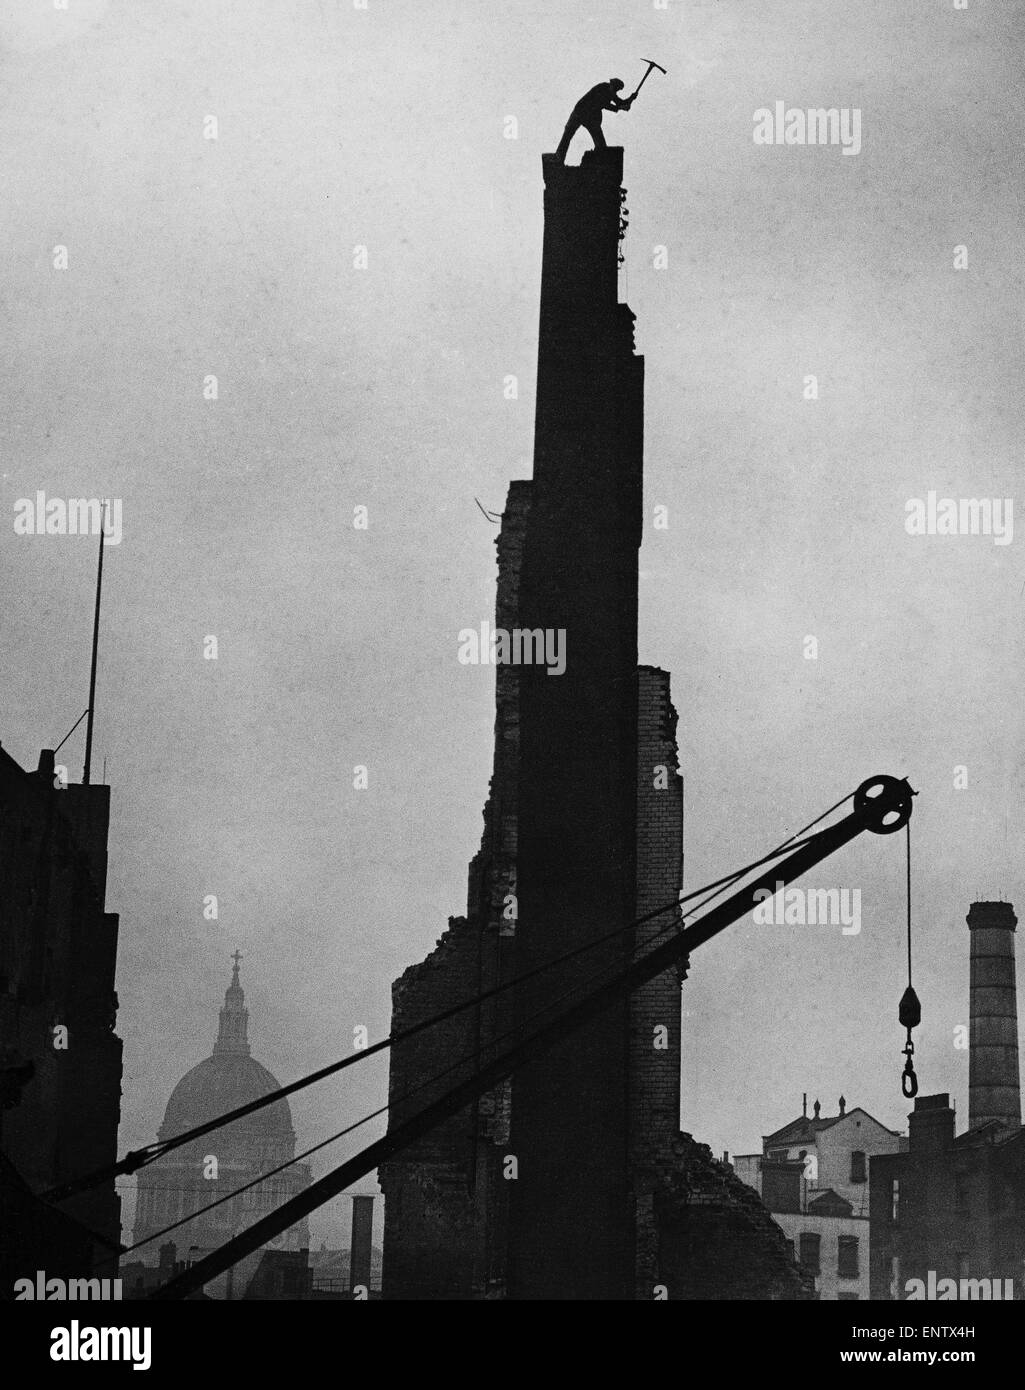 Workman James Woods demolishing a chimney stack with his pickaxe in the shadow of St Paul's cathedral, after the building was damaged in an air raid during the Second World War. March 1942. Stock Photo